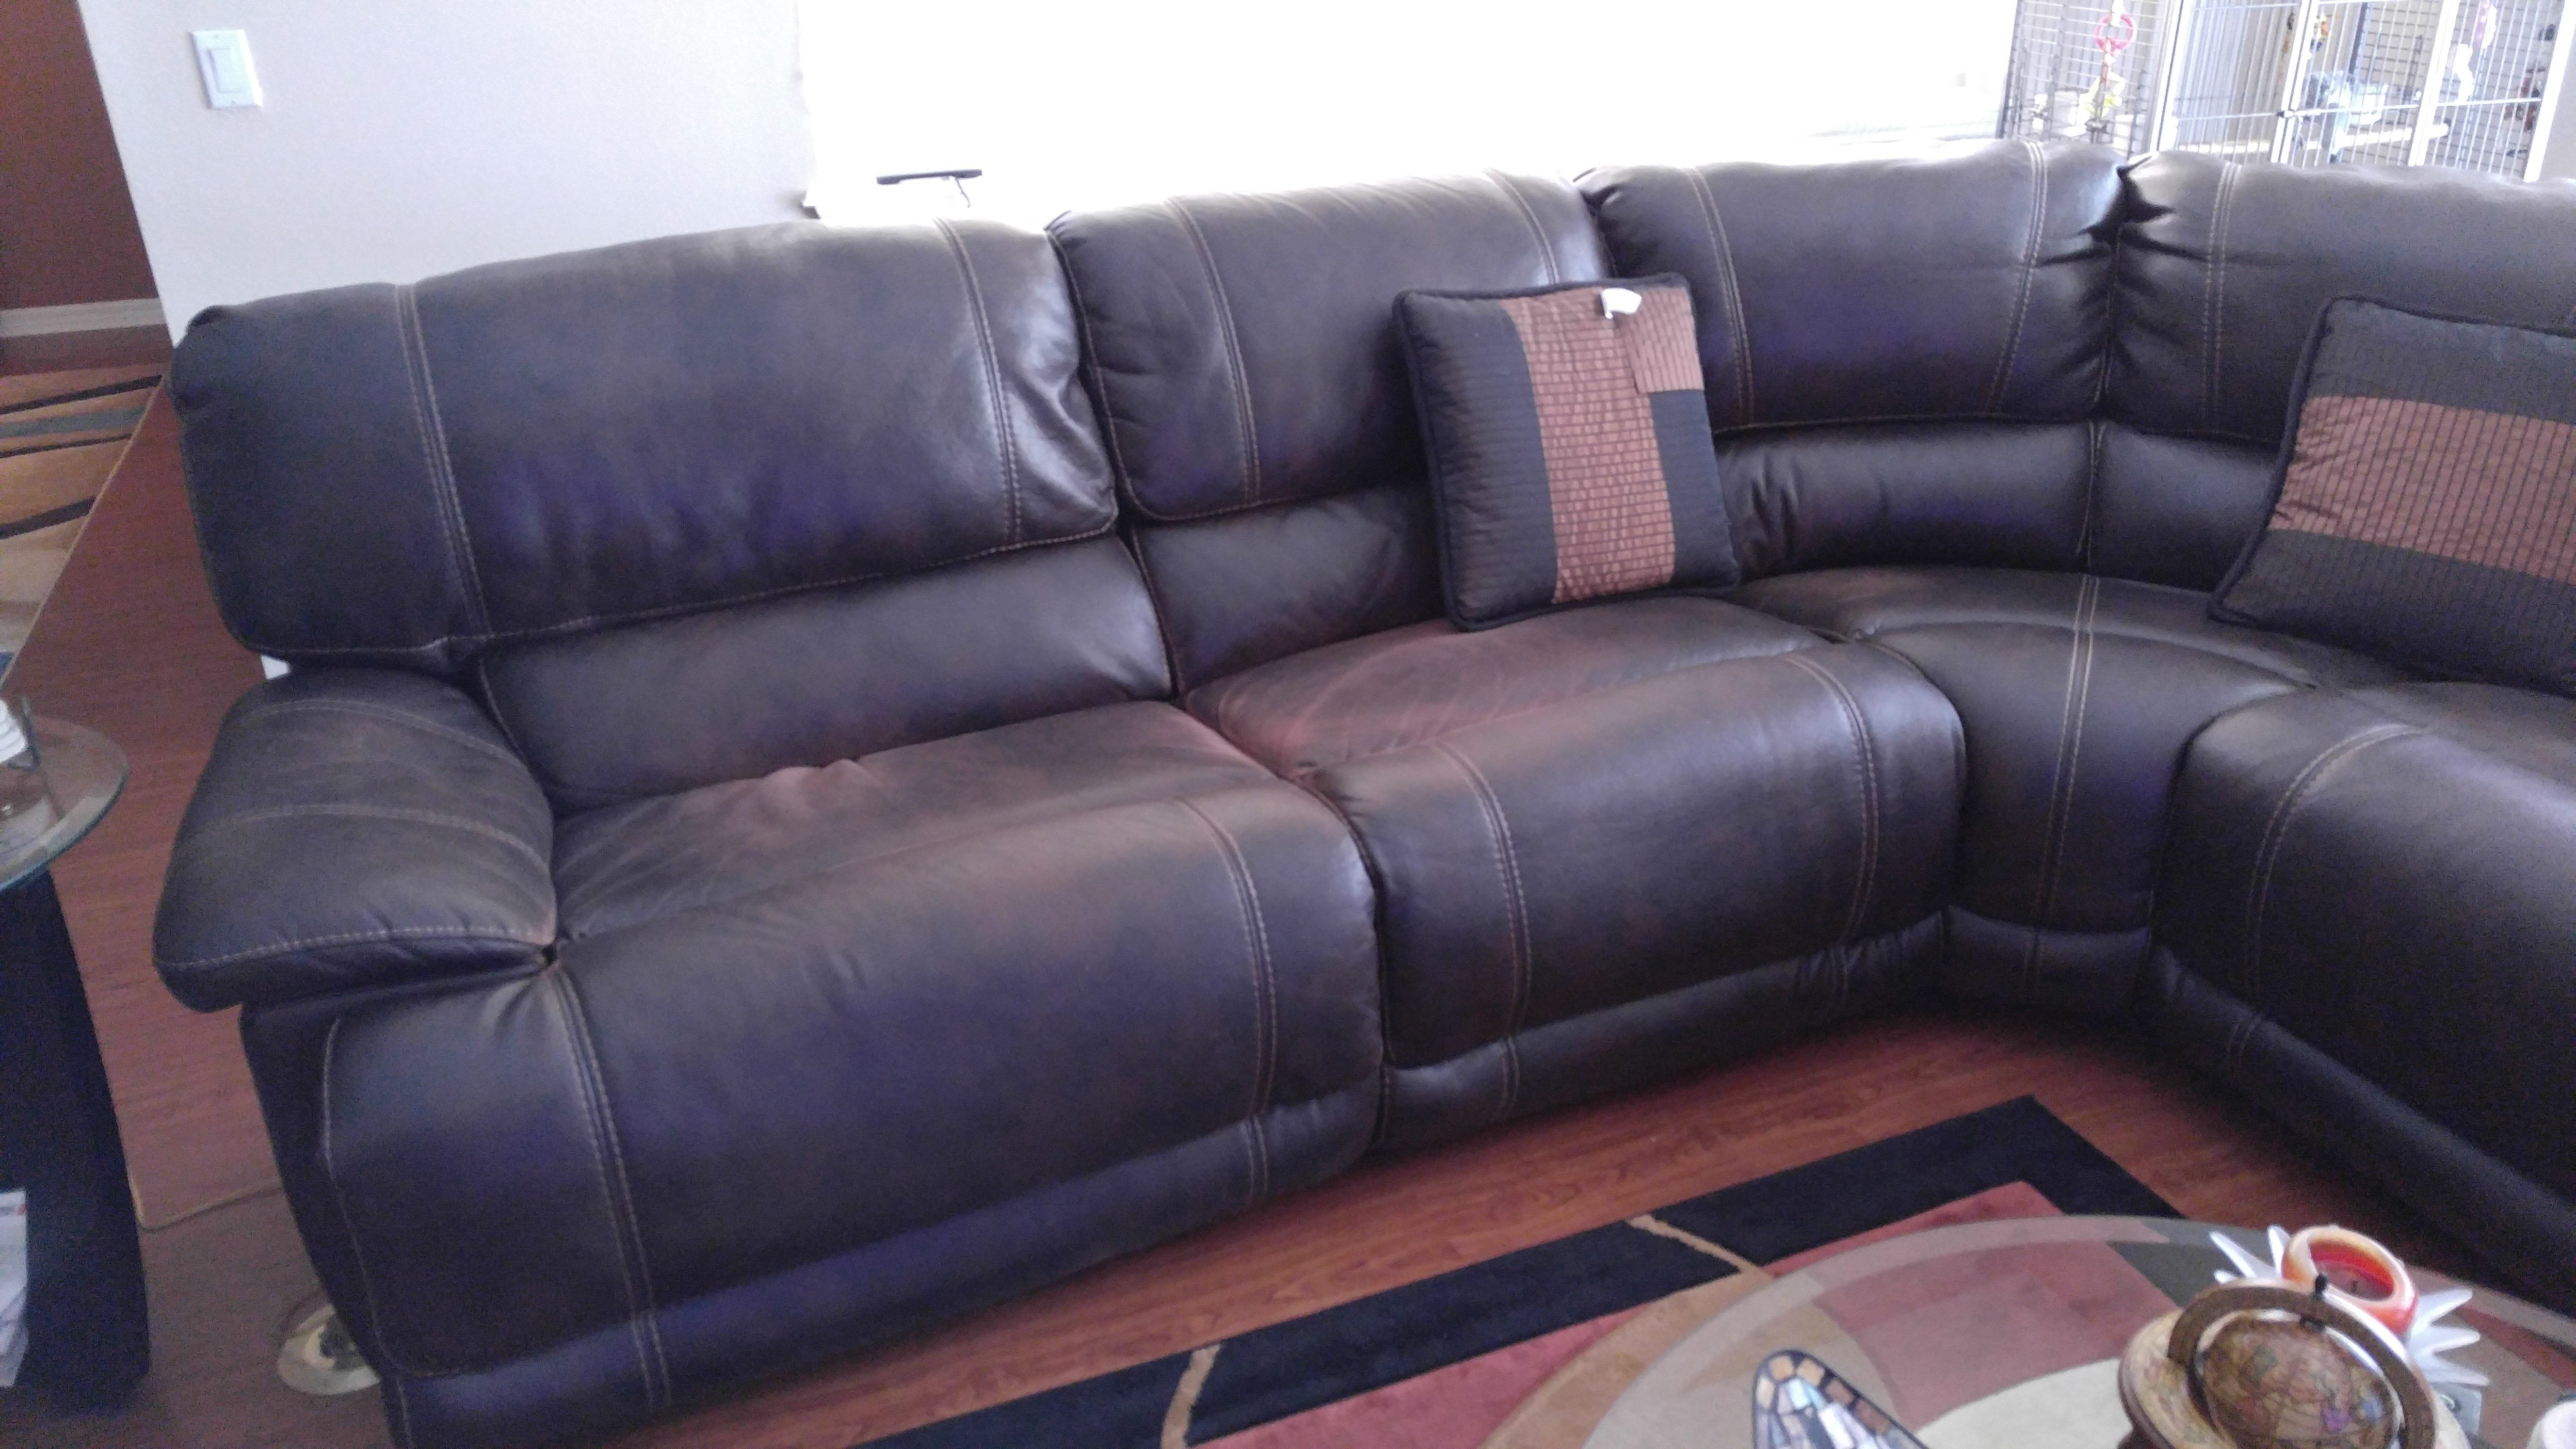 Purple Upholstery Stain Remover Crypton Pet Cp Each H0001 ~ Idolza Inside Kanes Sectional Sofas (View 9 of 10)